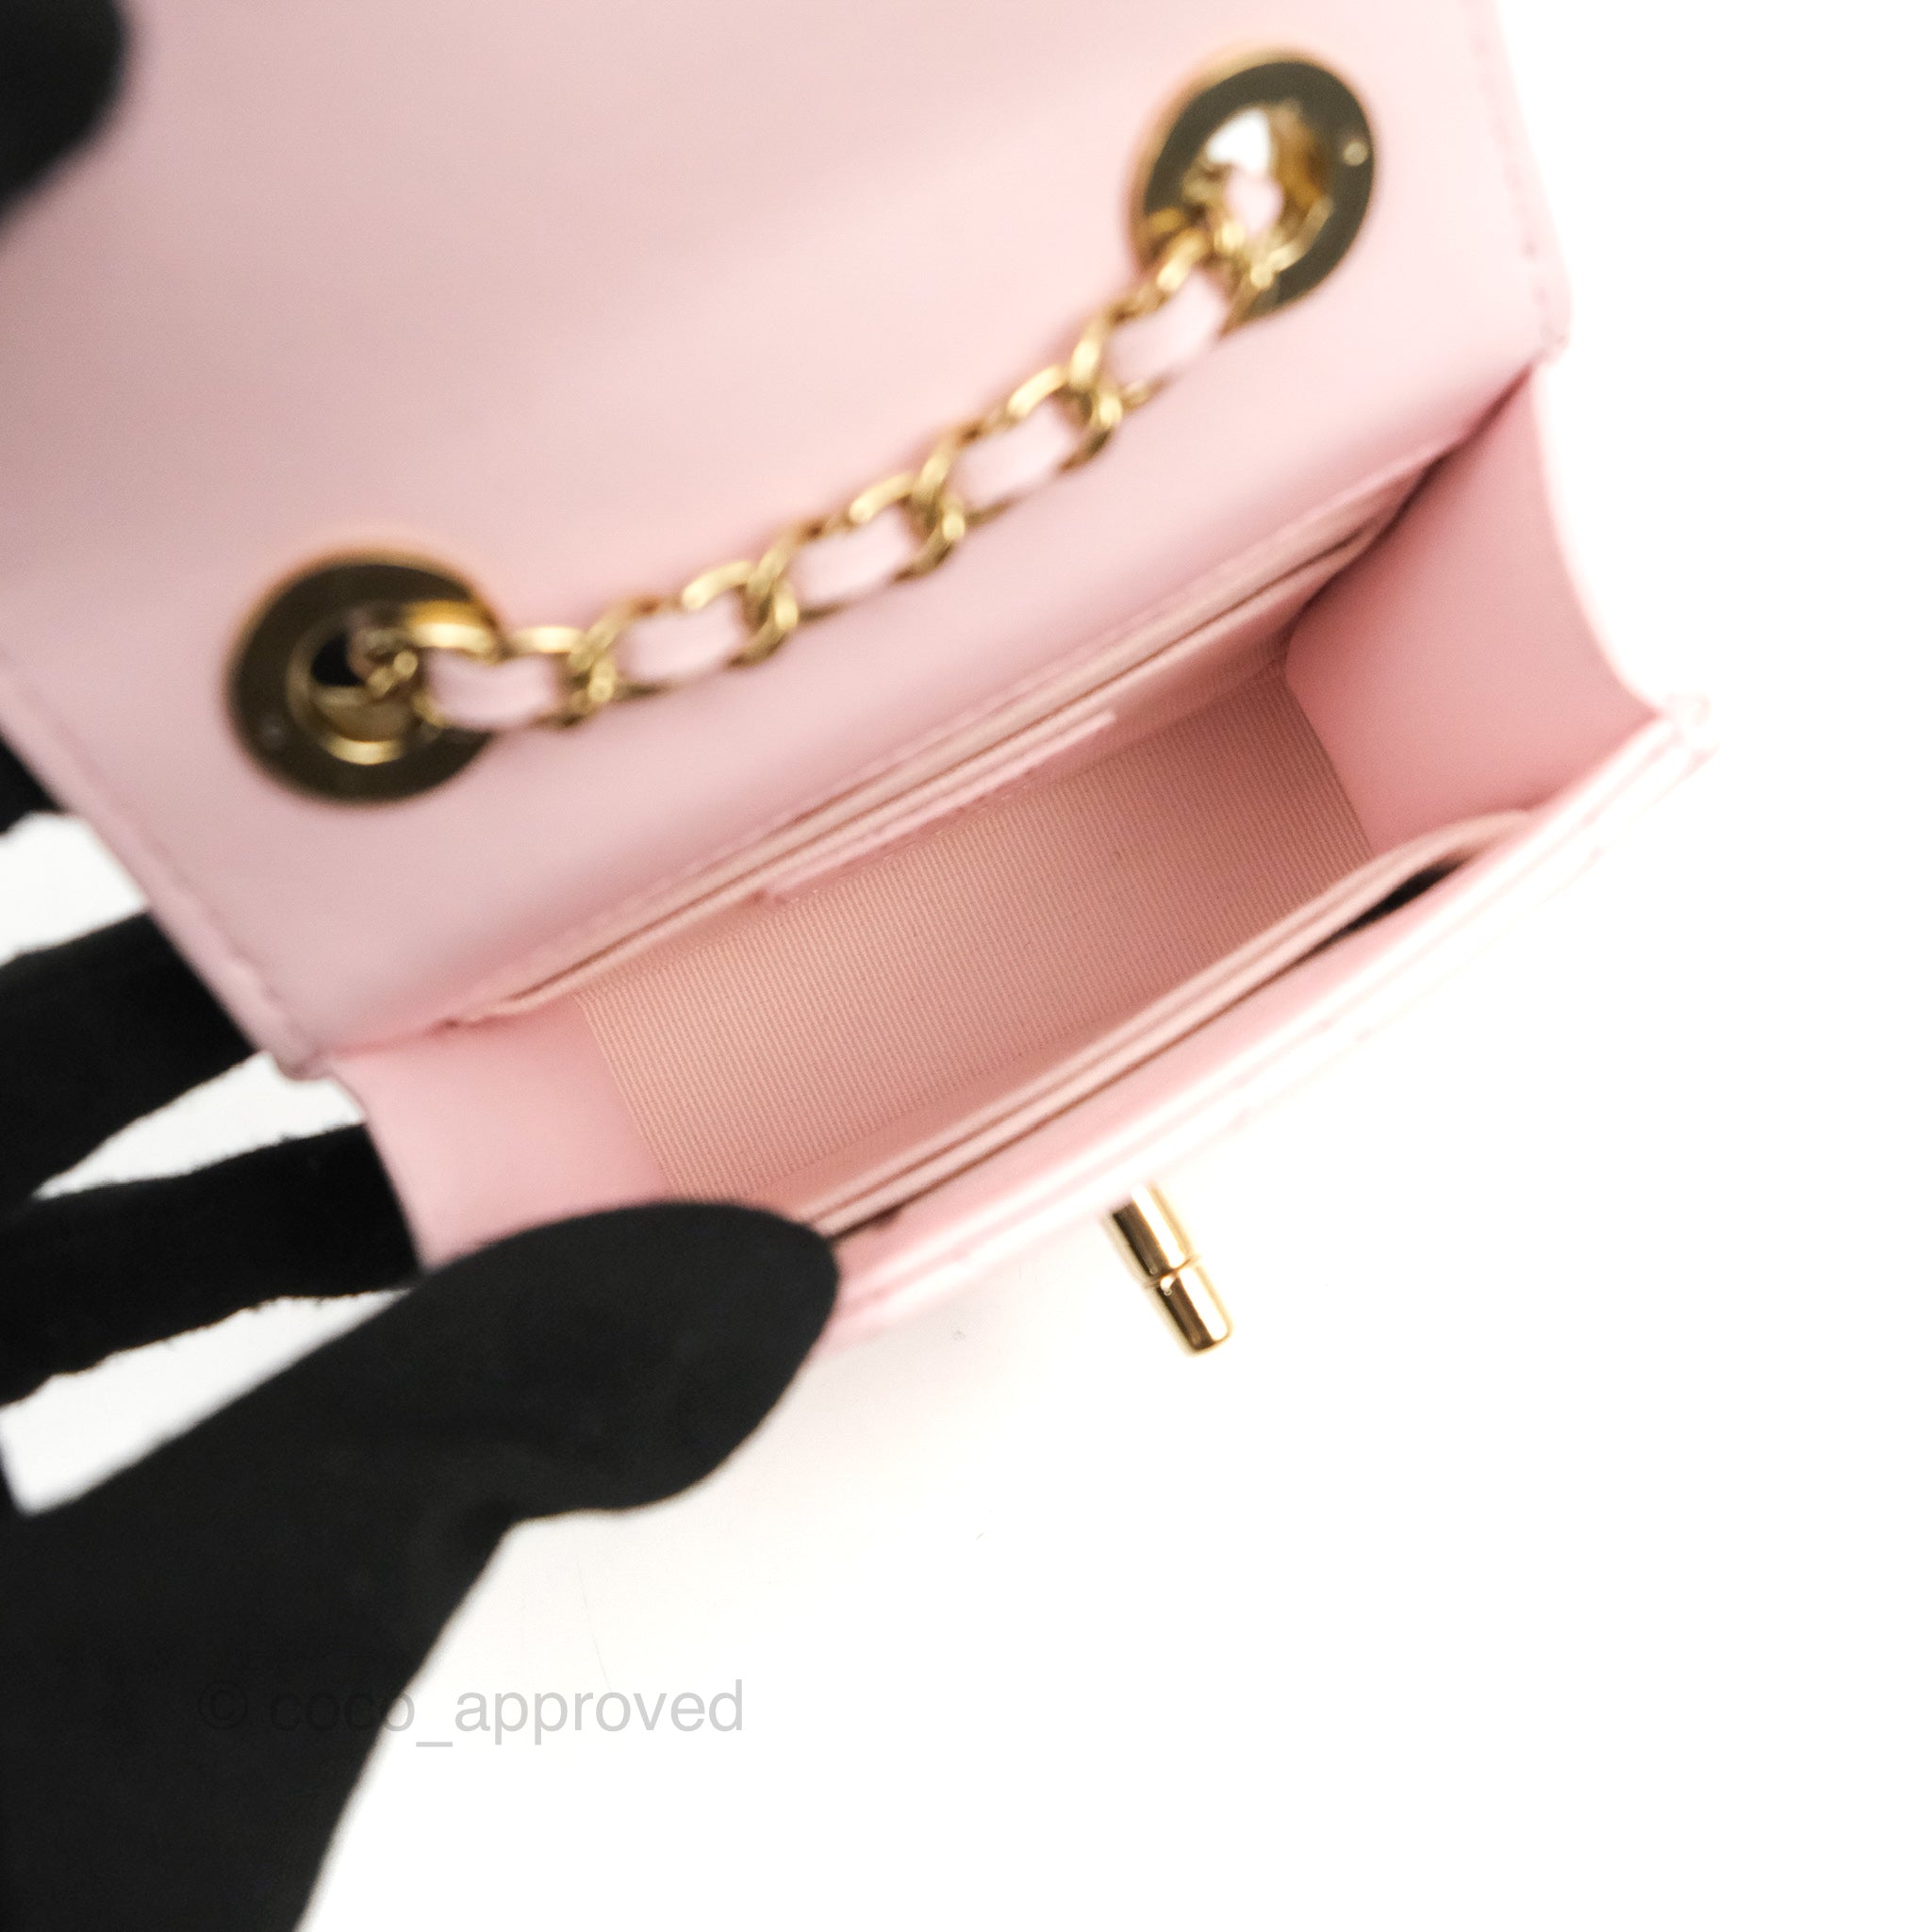 Chanel Mini Quilted Trendy CC Clutch With Chain Pink Lambskin Gold Har –  Coco Approved Studio